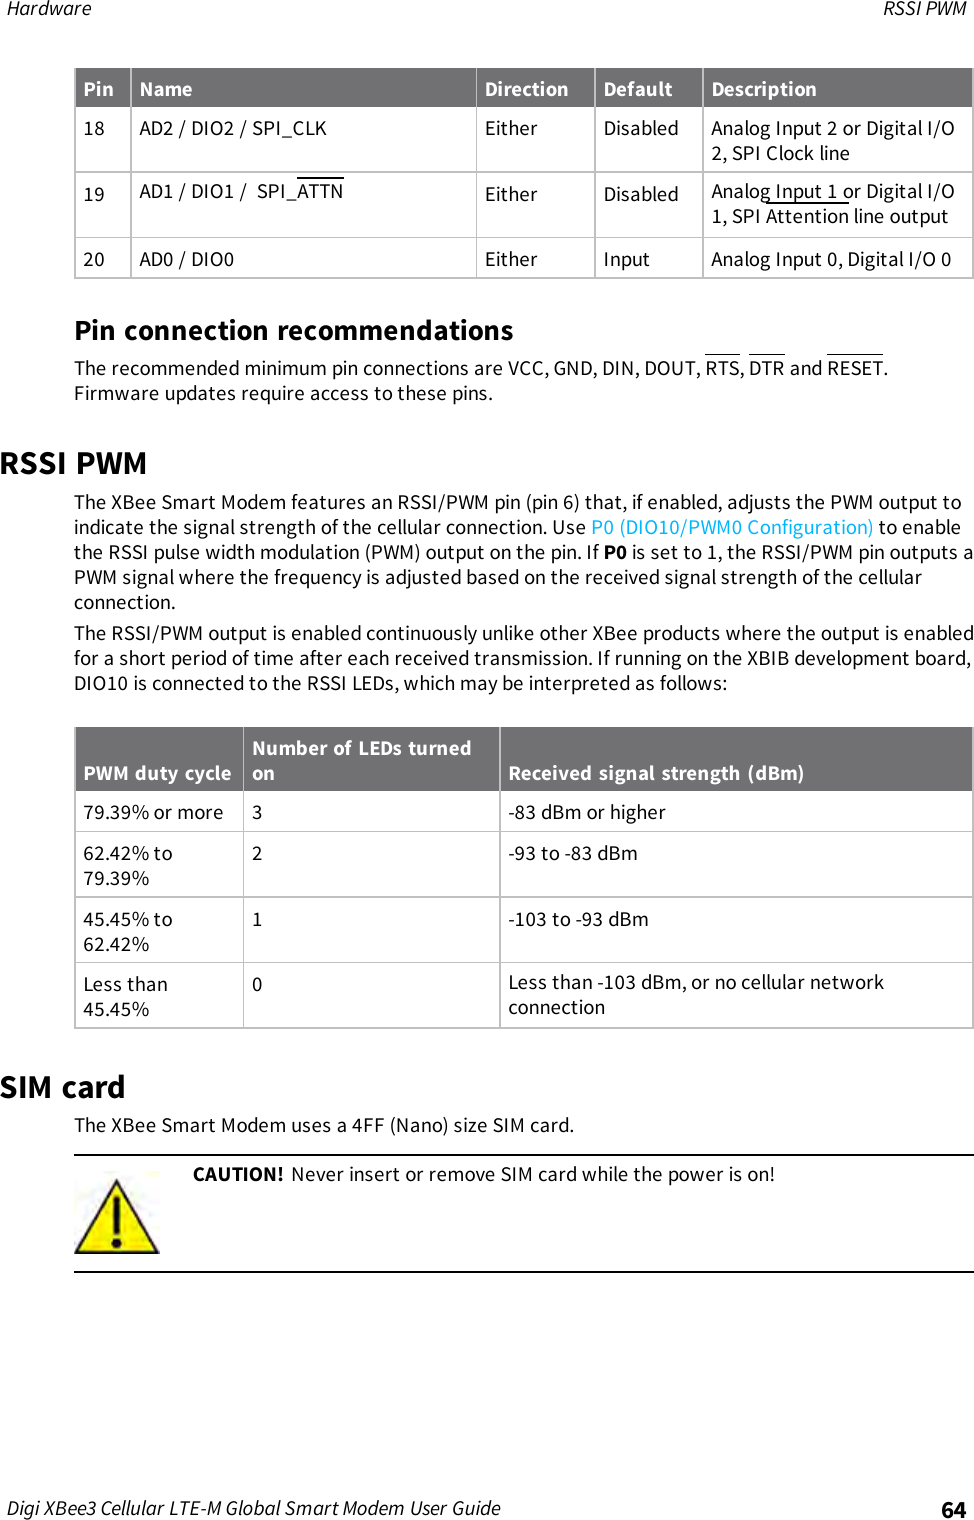 Page 64 of Digi XB3M1 XBee3 Cellular LTE-M User Manual 